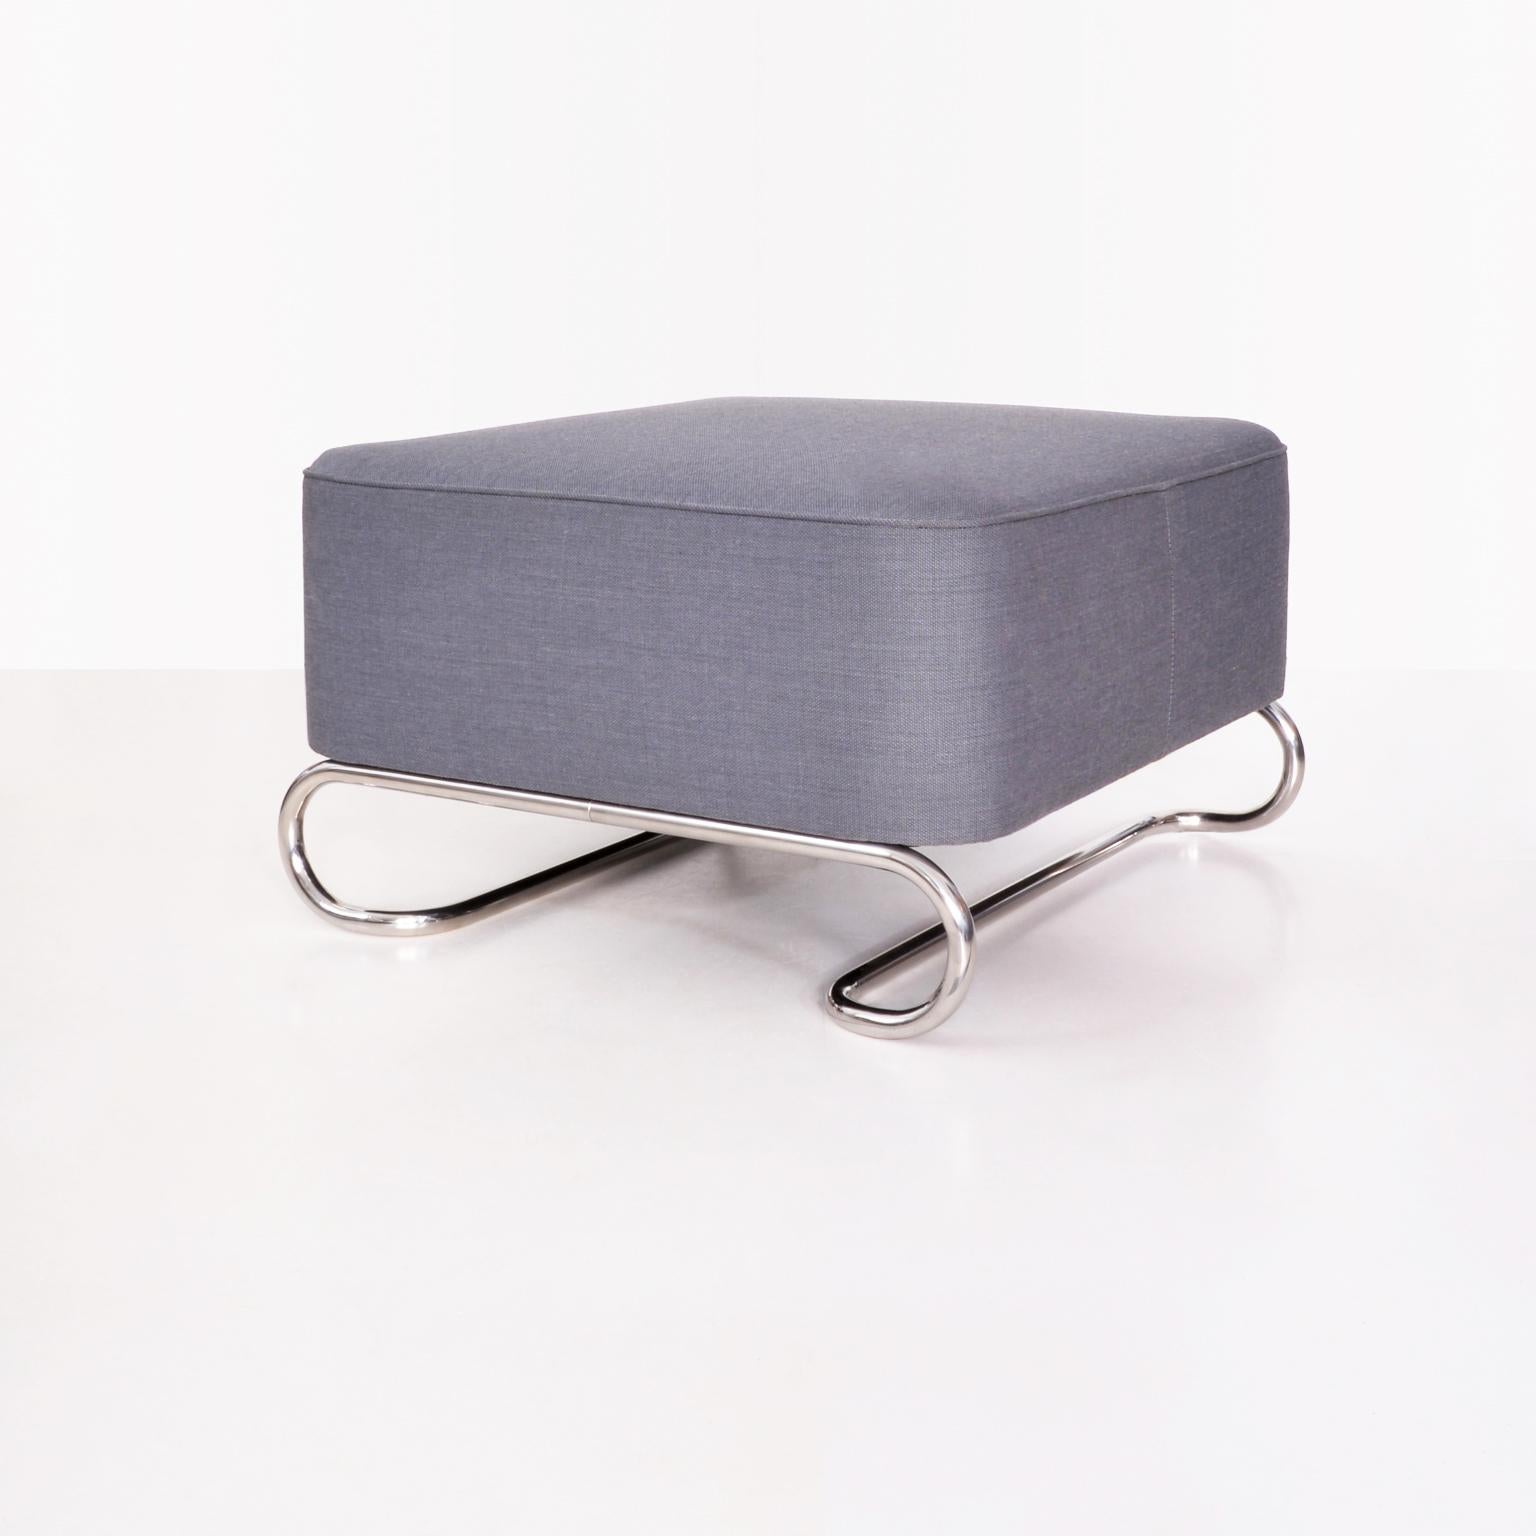 Large customizable tubular steel stool with fabric / leather upholstery. Timelessly elegant stool in a Classic design. Light appearance with refined, rounded details and Material contrast. Available on request in different dimensions and amounts.